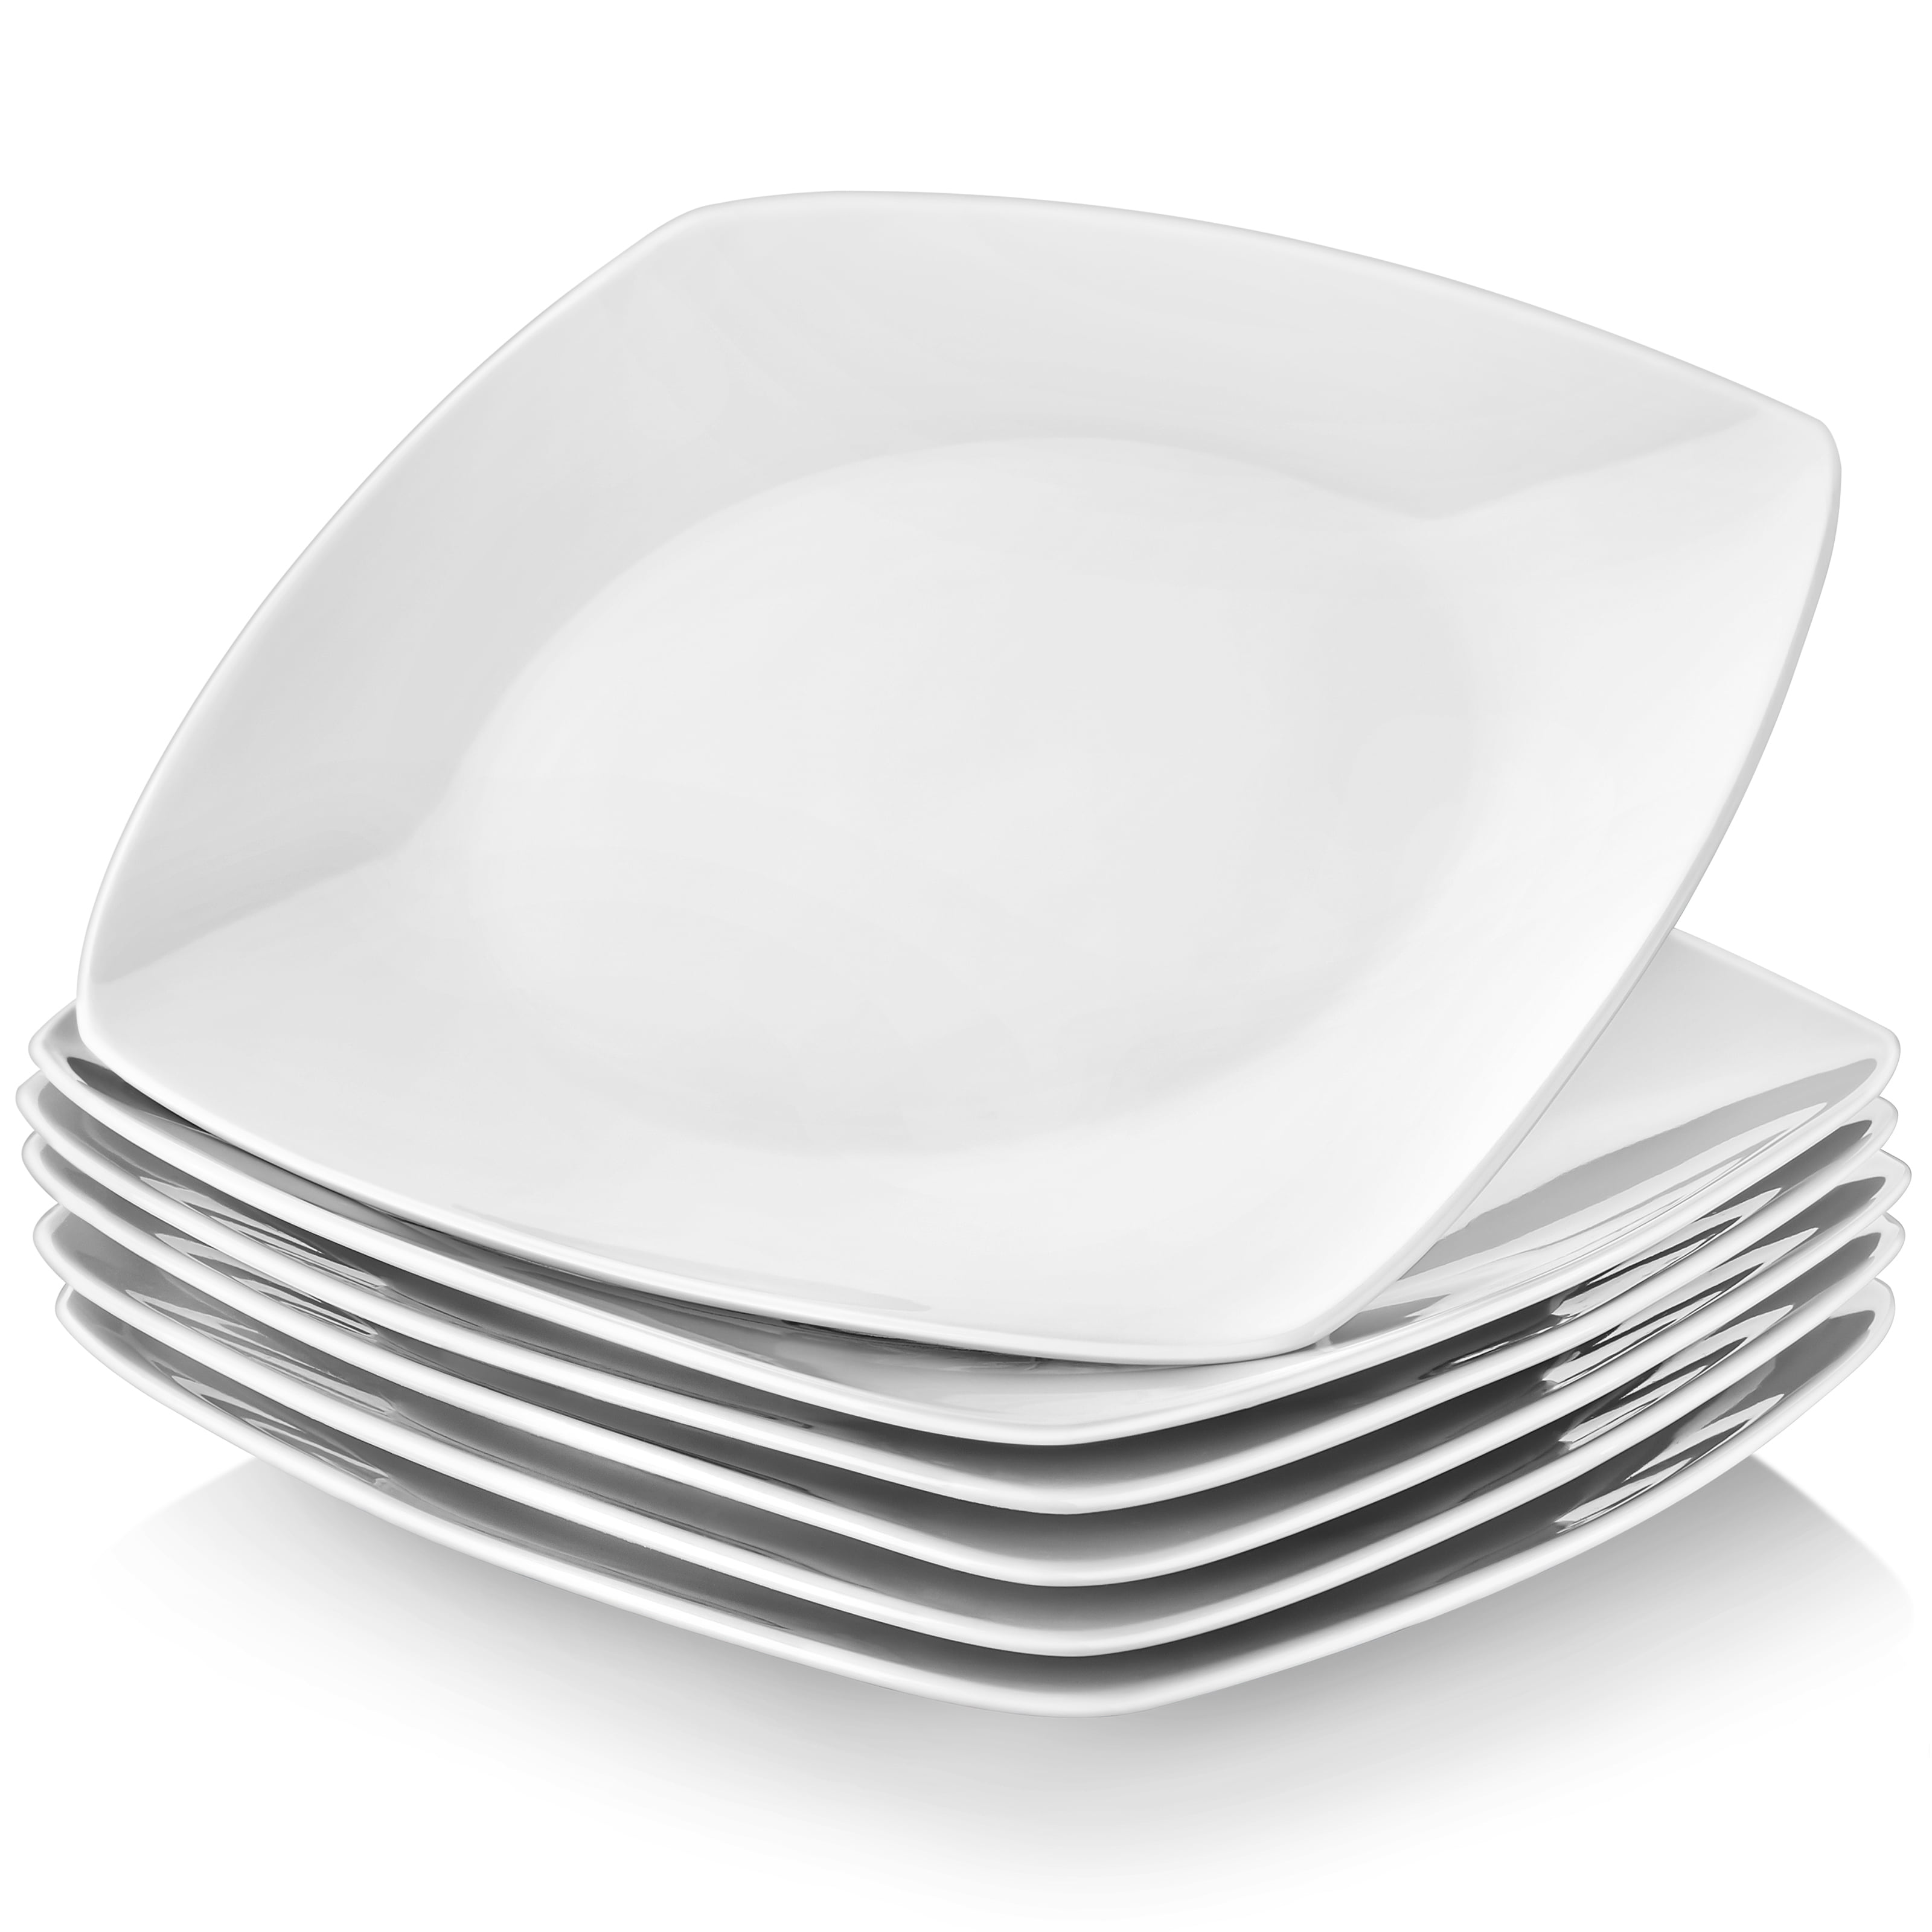 White Home Essentials 15281 Fiddle and Fern Appetizer Plates 5-inch Square Set of 4 